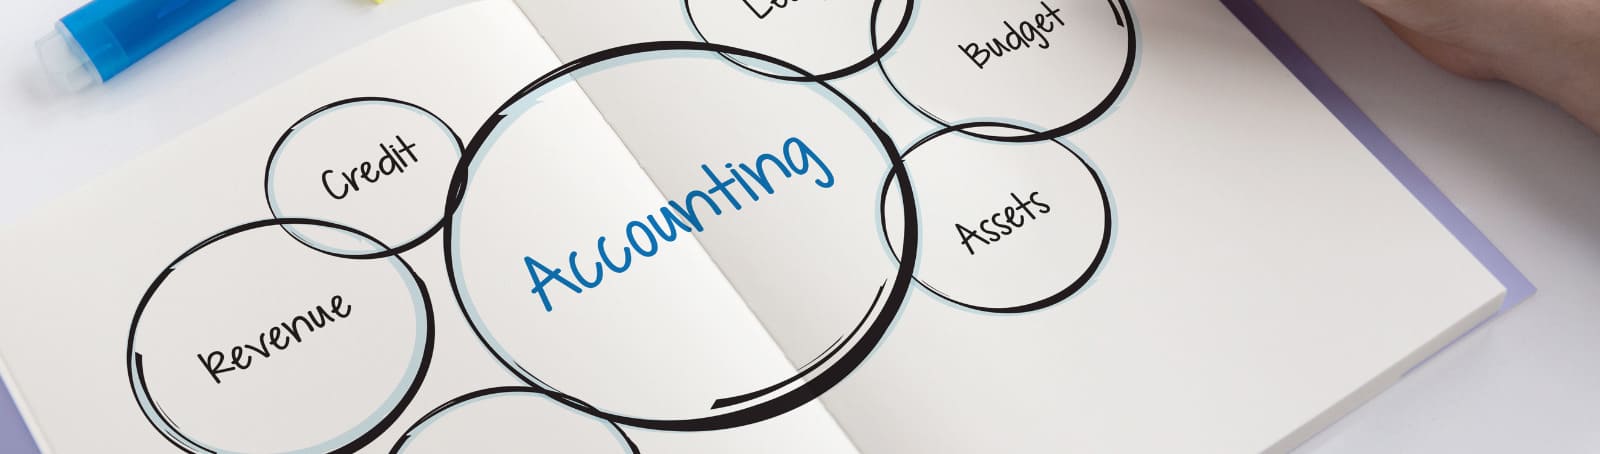 How to Audit and Review Your Accounting Services